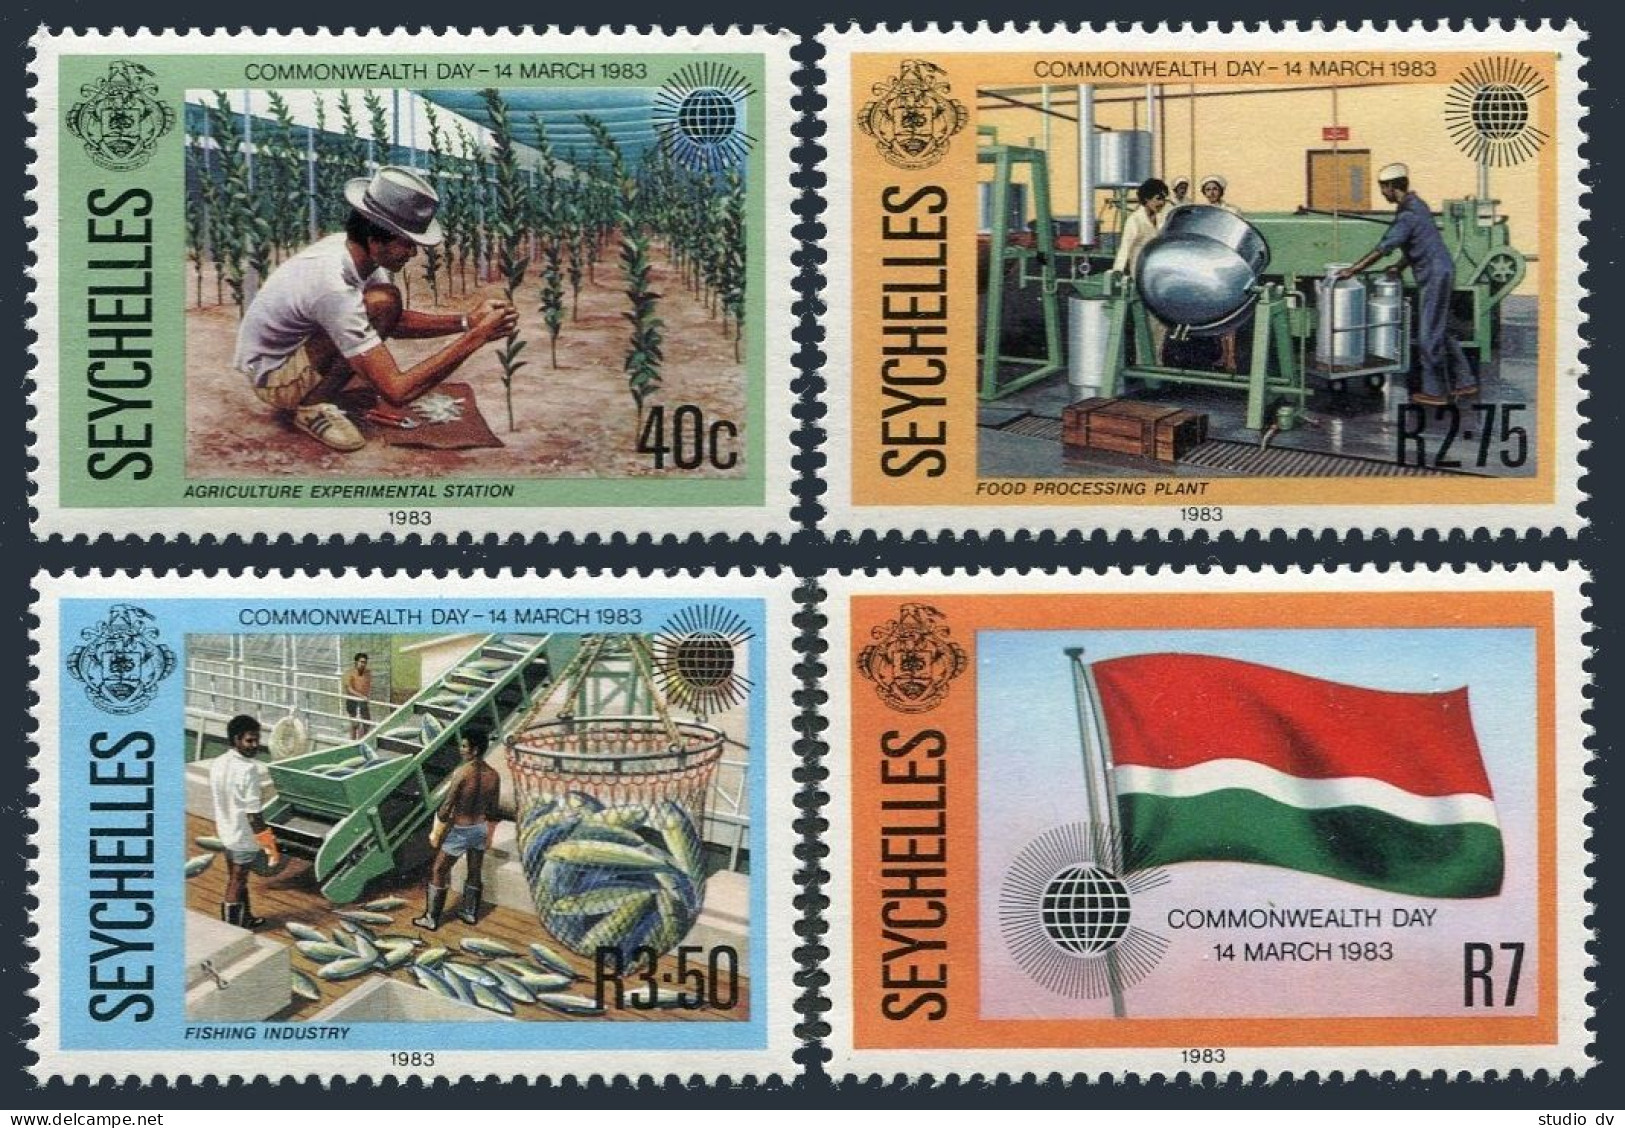 Seychelles 511-514,MNH.Michel 527-530. Commonwealth Day,1983.Agriculture,Fishing - Seychelles (1976-...)